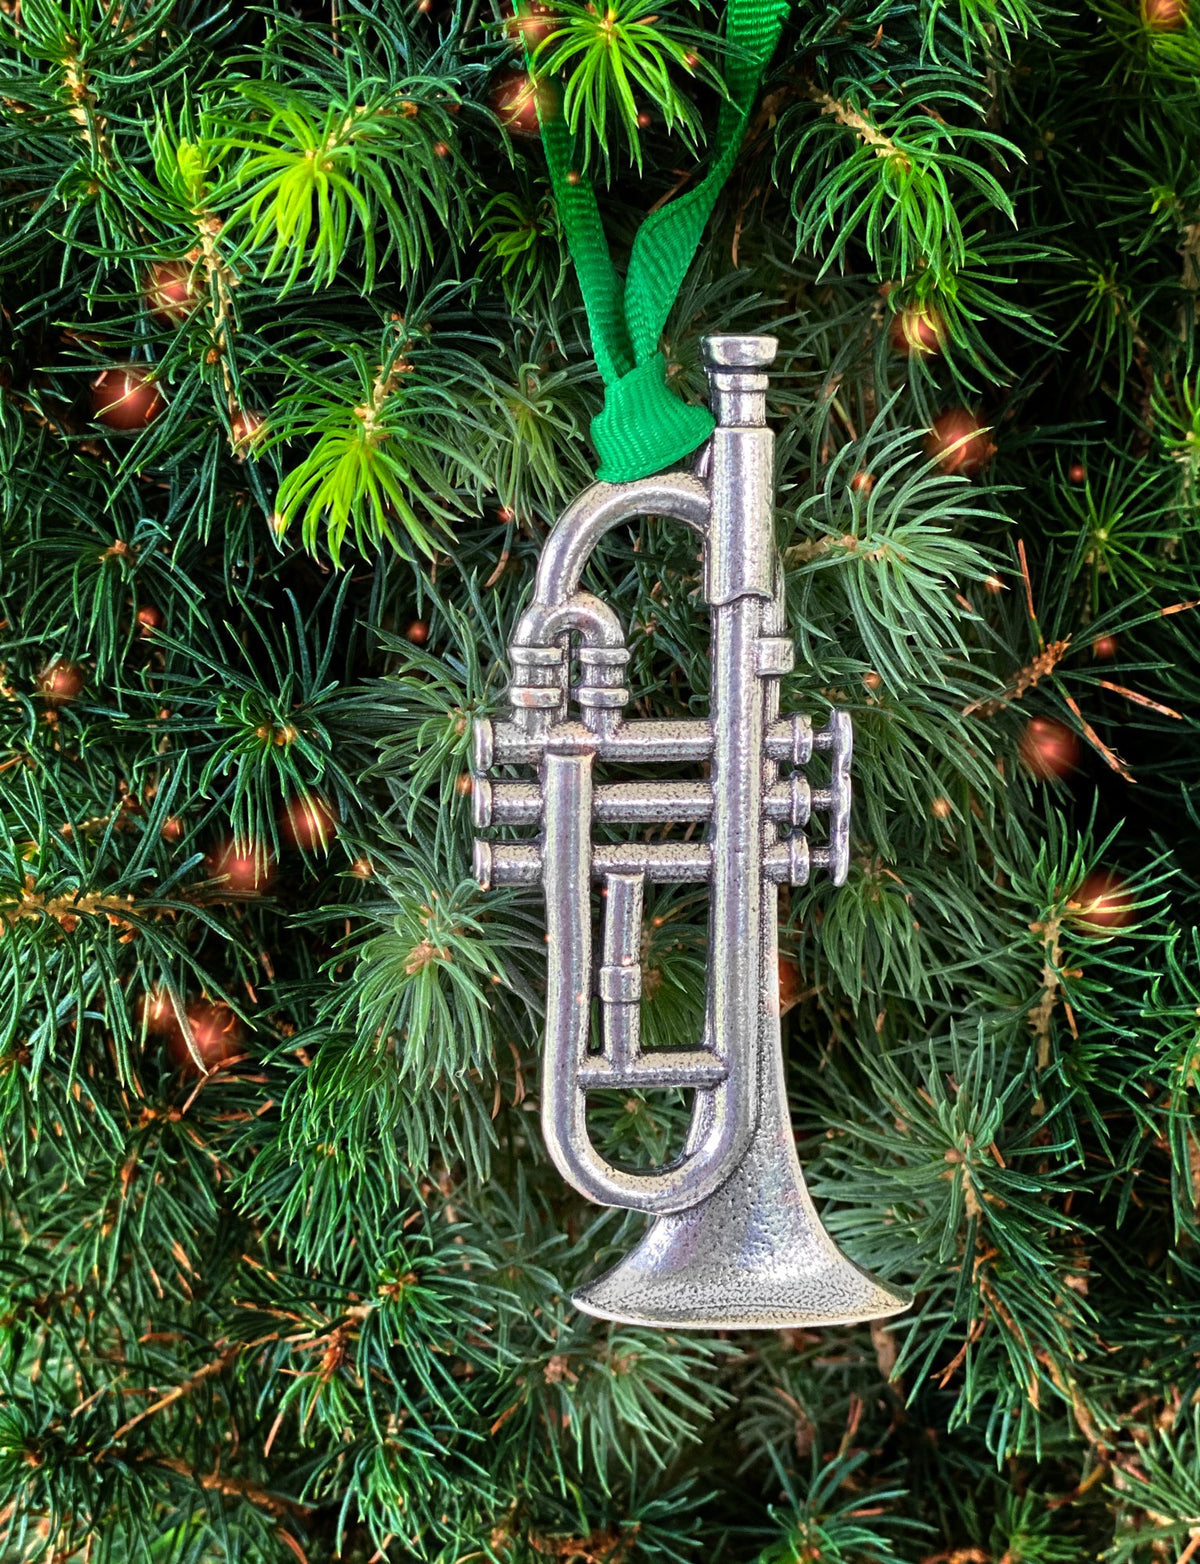 Oberon Design Holiday Ornament, Christmas Trumpet in Tree